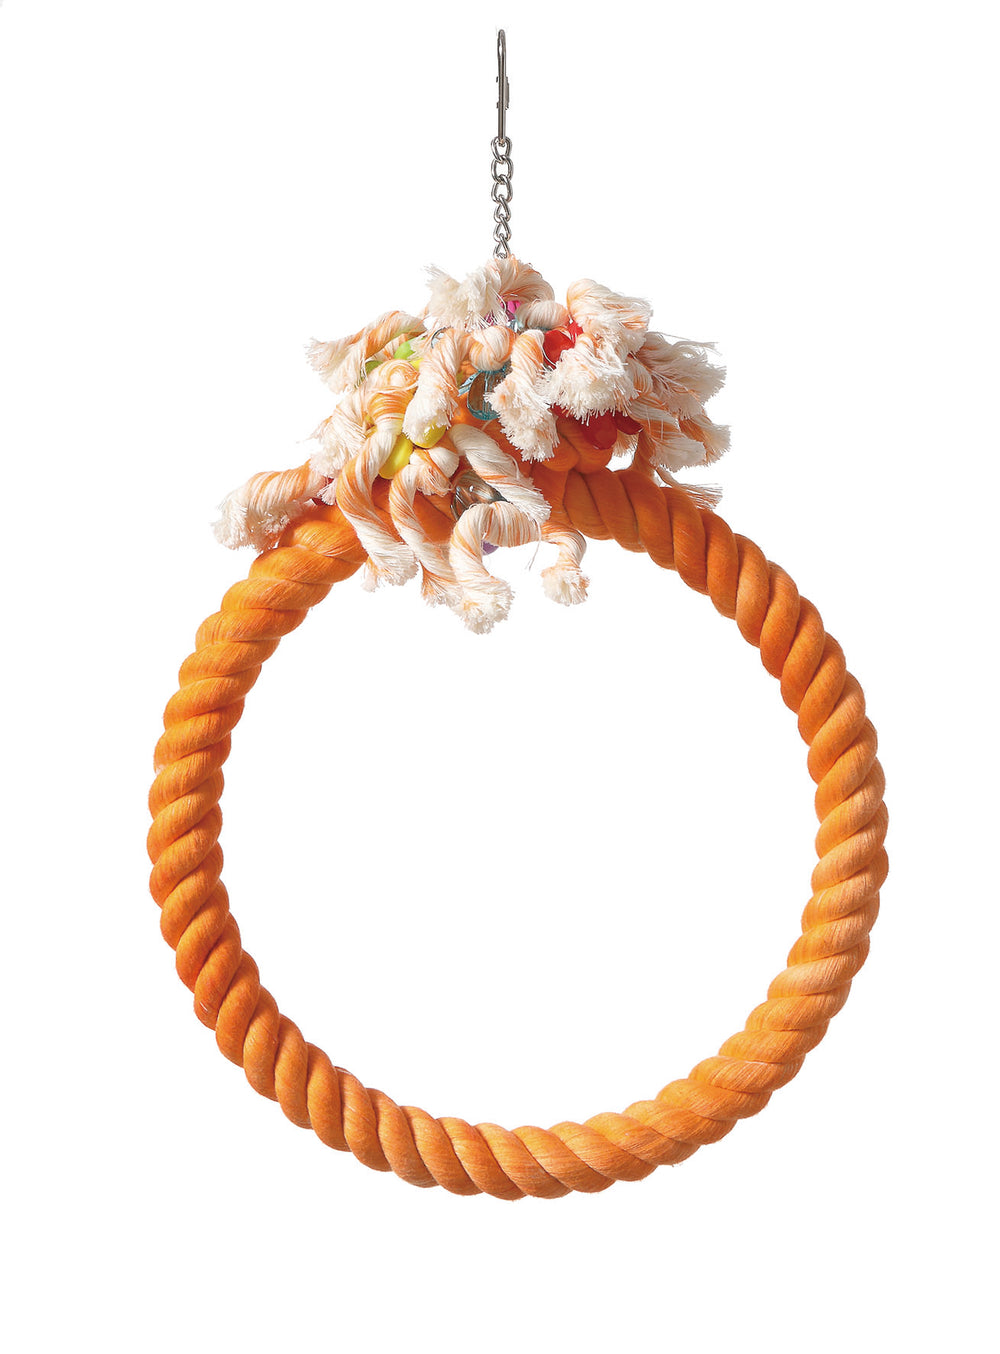 Supreme Cotton Ring Swing - Pet Products R Us